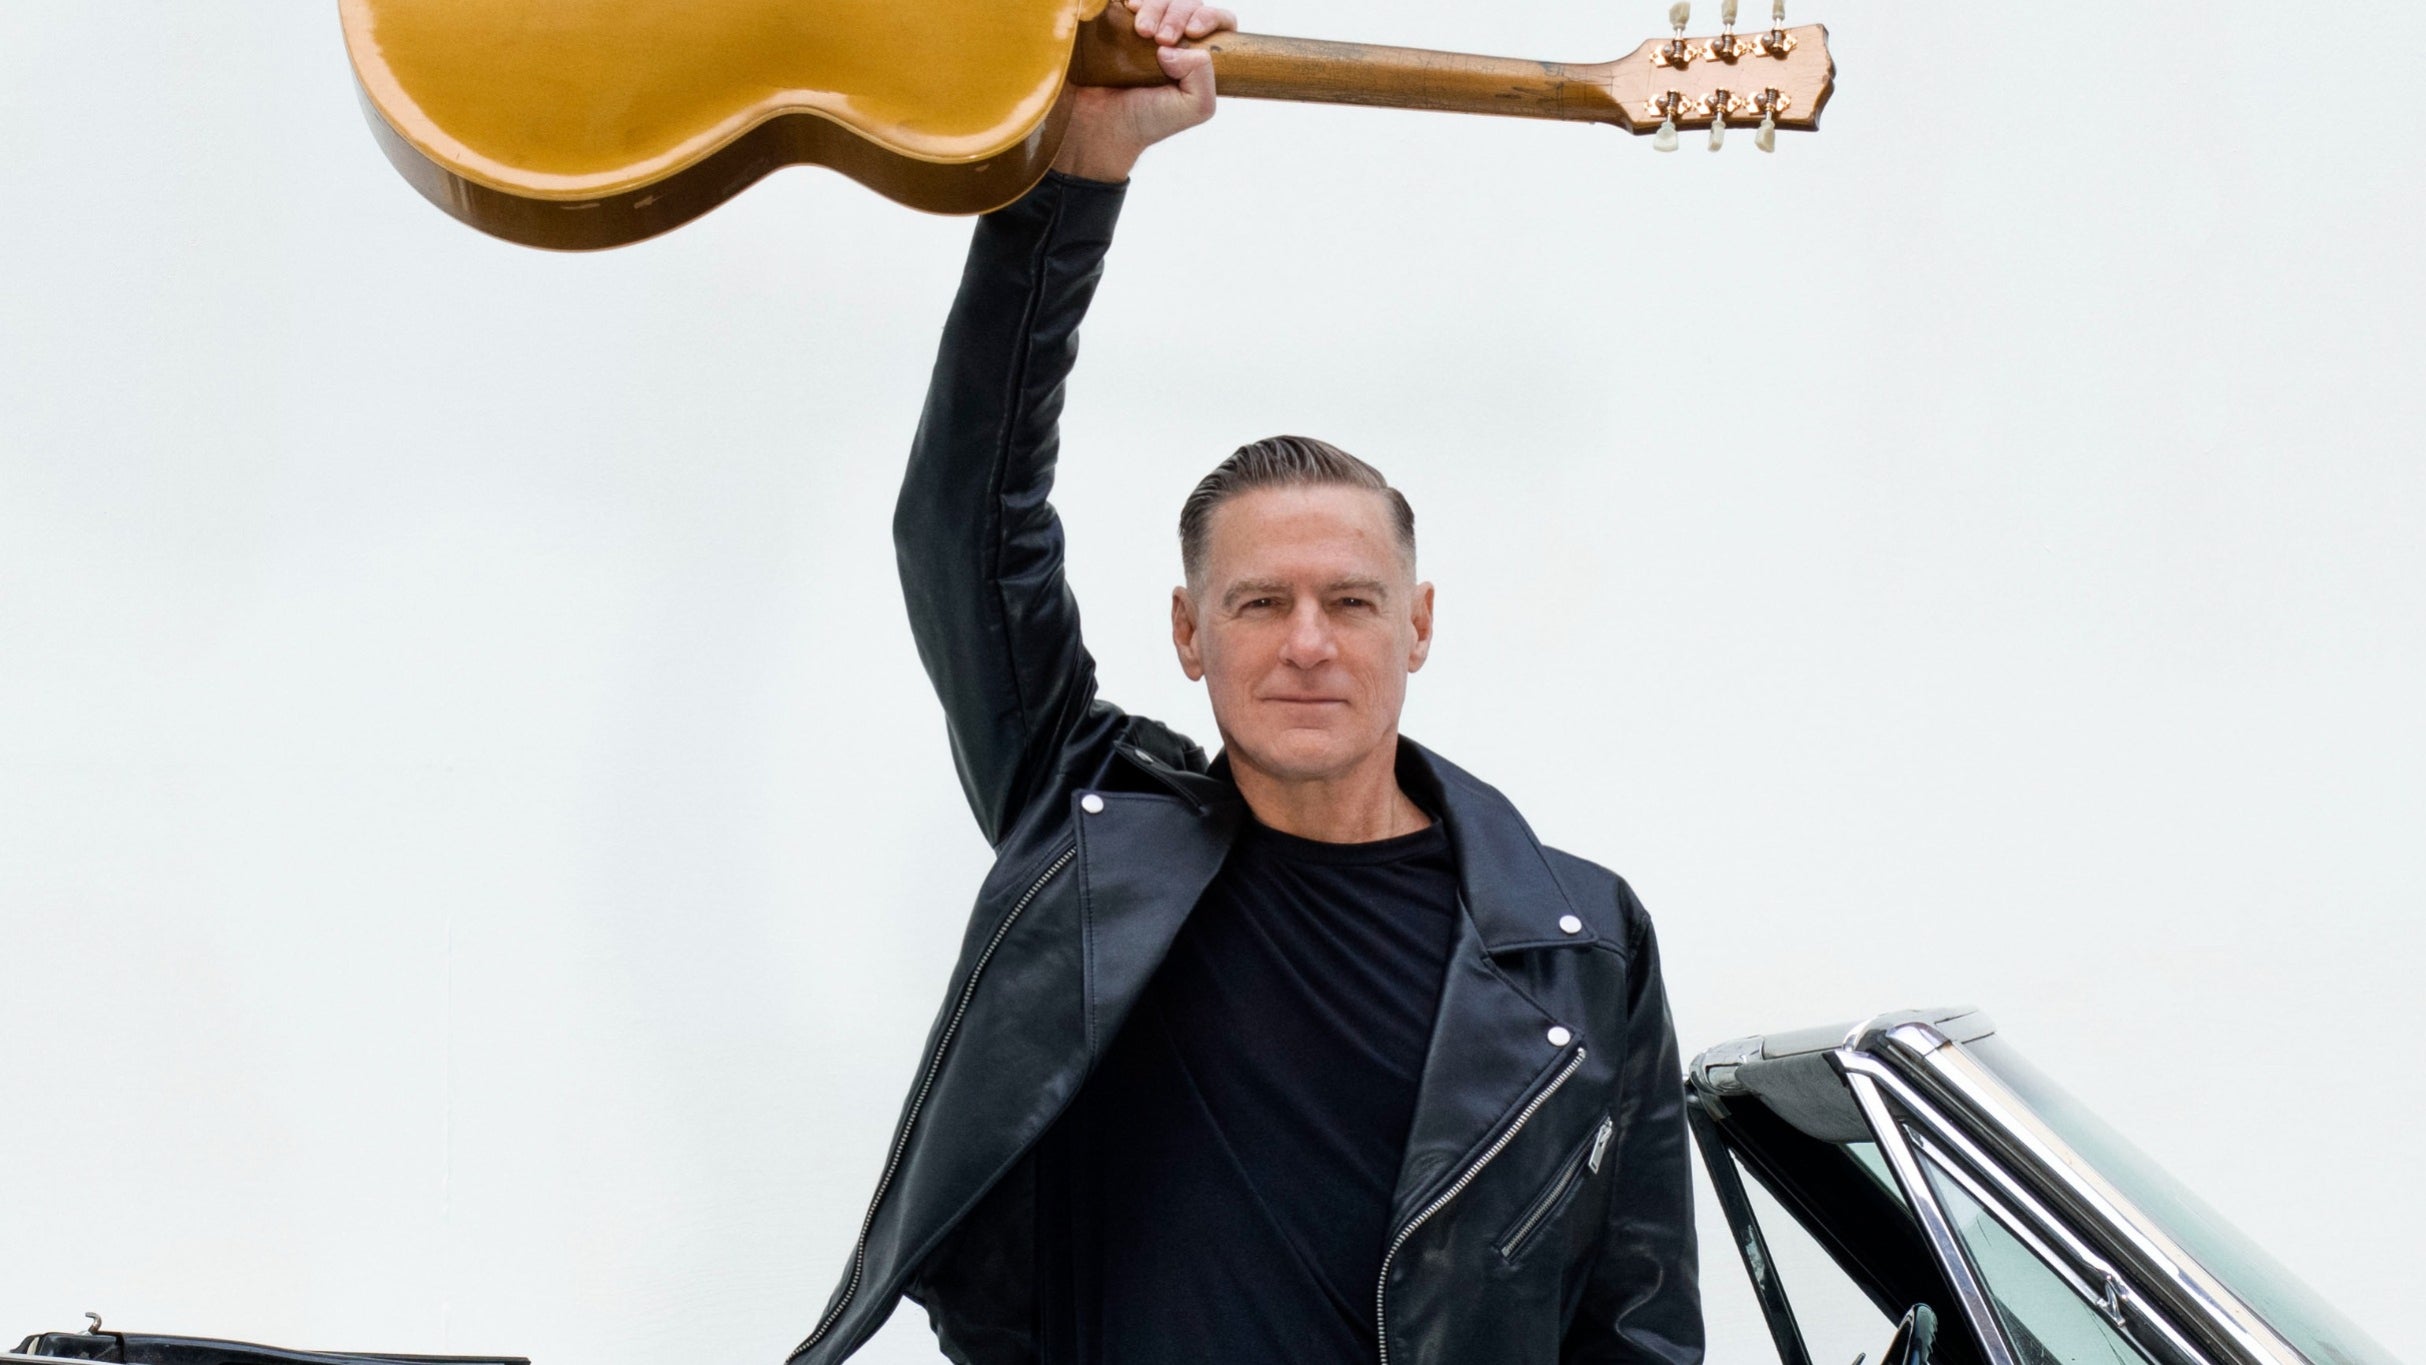 Bryan Adams: So Happy It Hurts w/ Eurythmics Songbook ft. Dave Stewart free presale listing for performance tickets in Milwaukee, WI (Fiserv Forum)